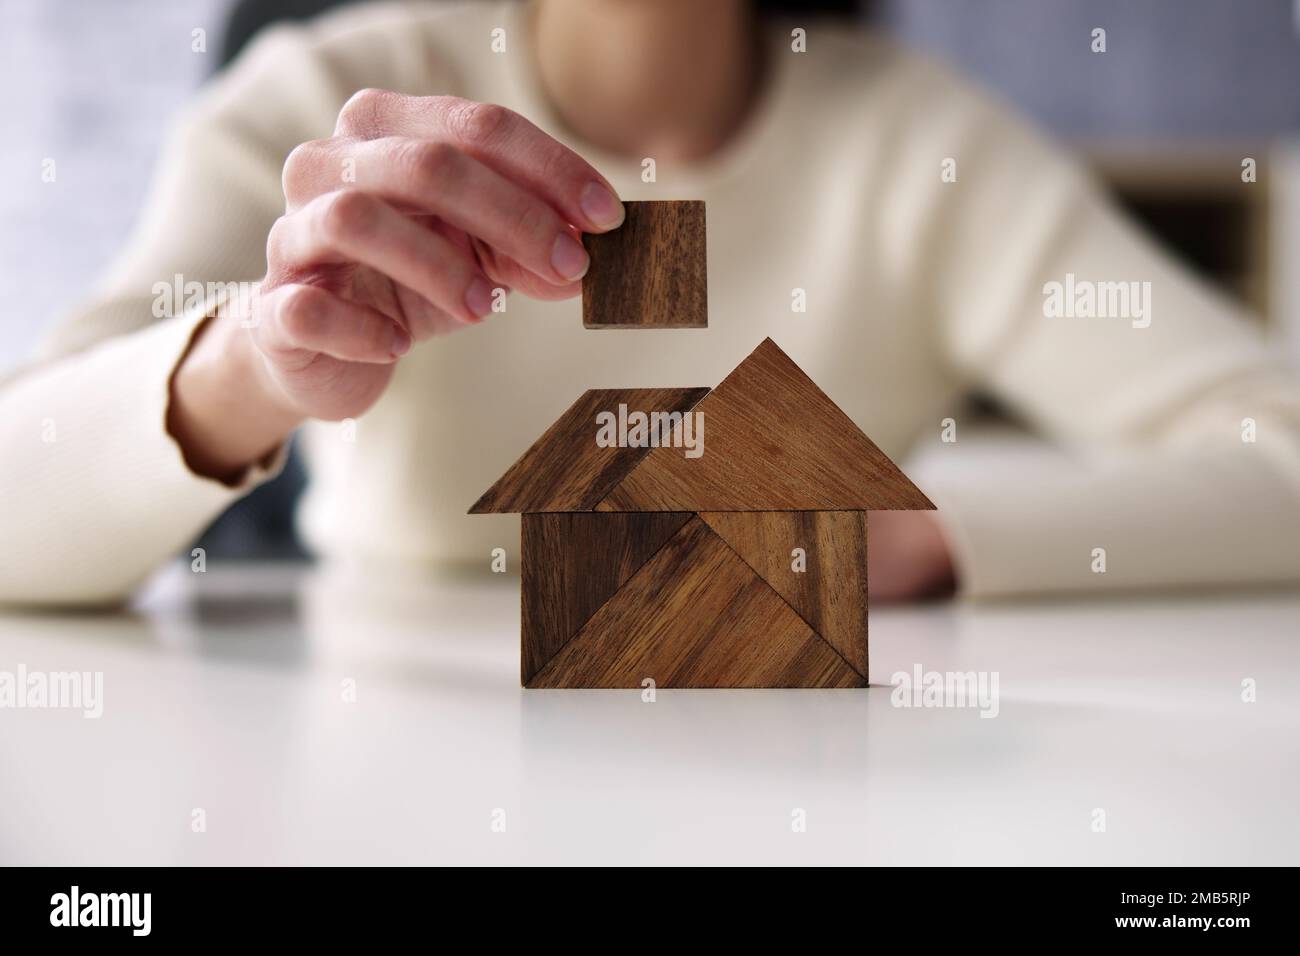 Woman Building House With Wooden Tangram Puzzle Stock Photo